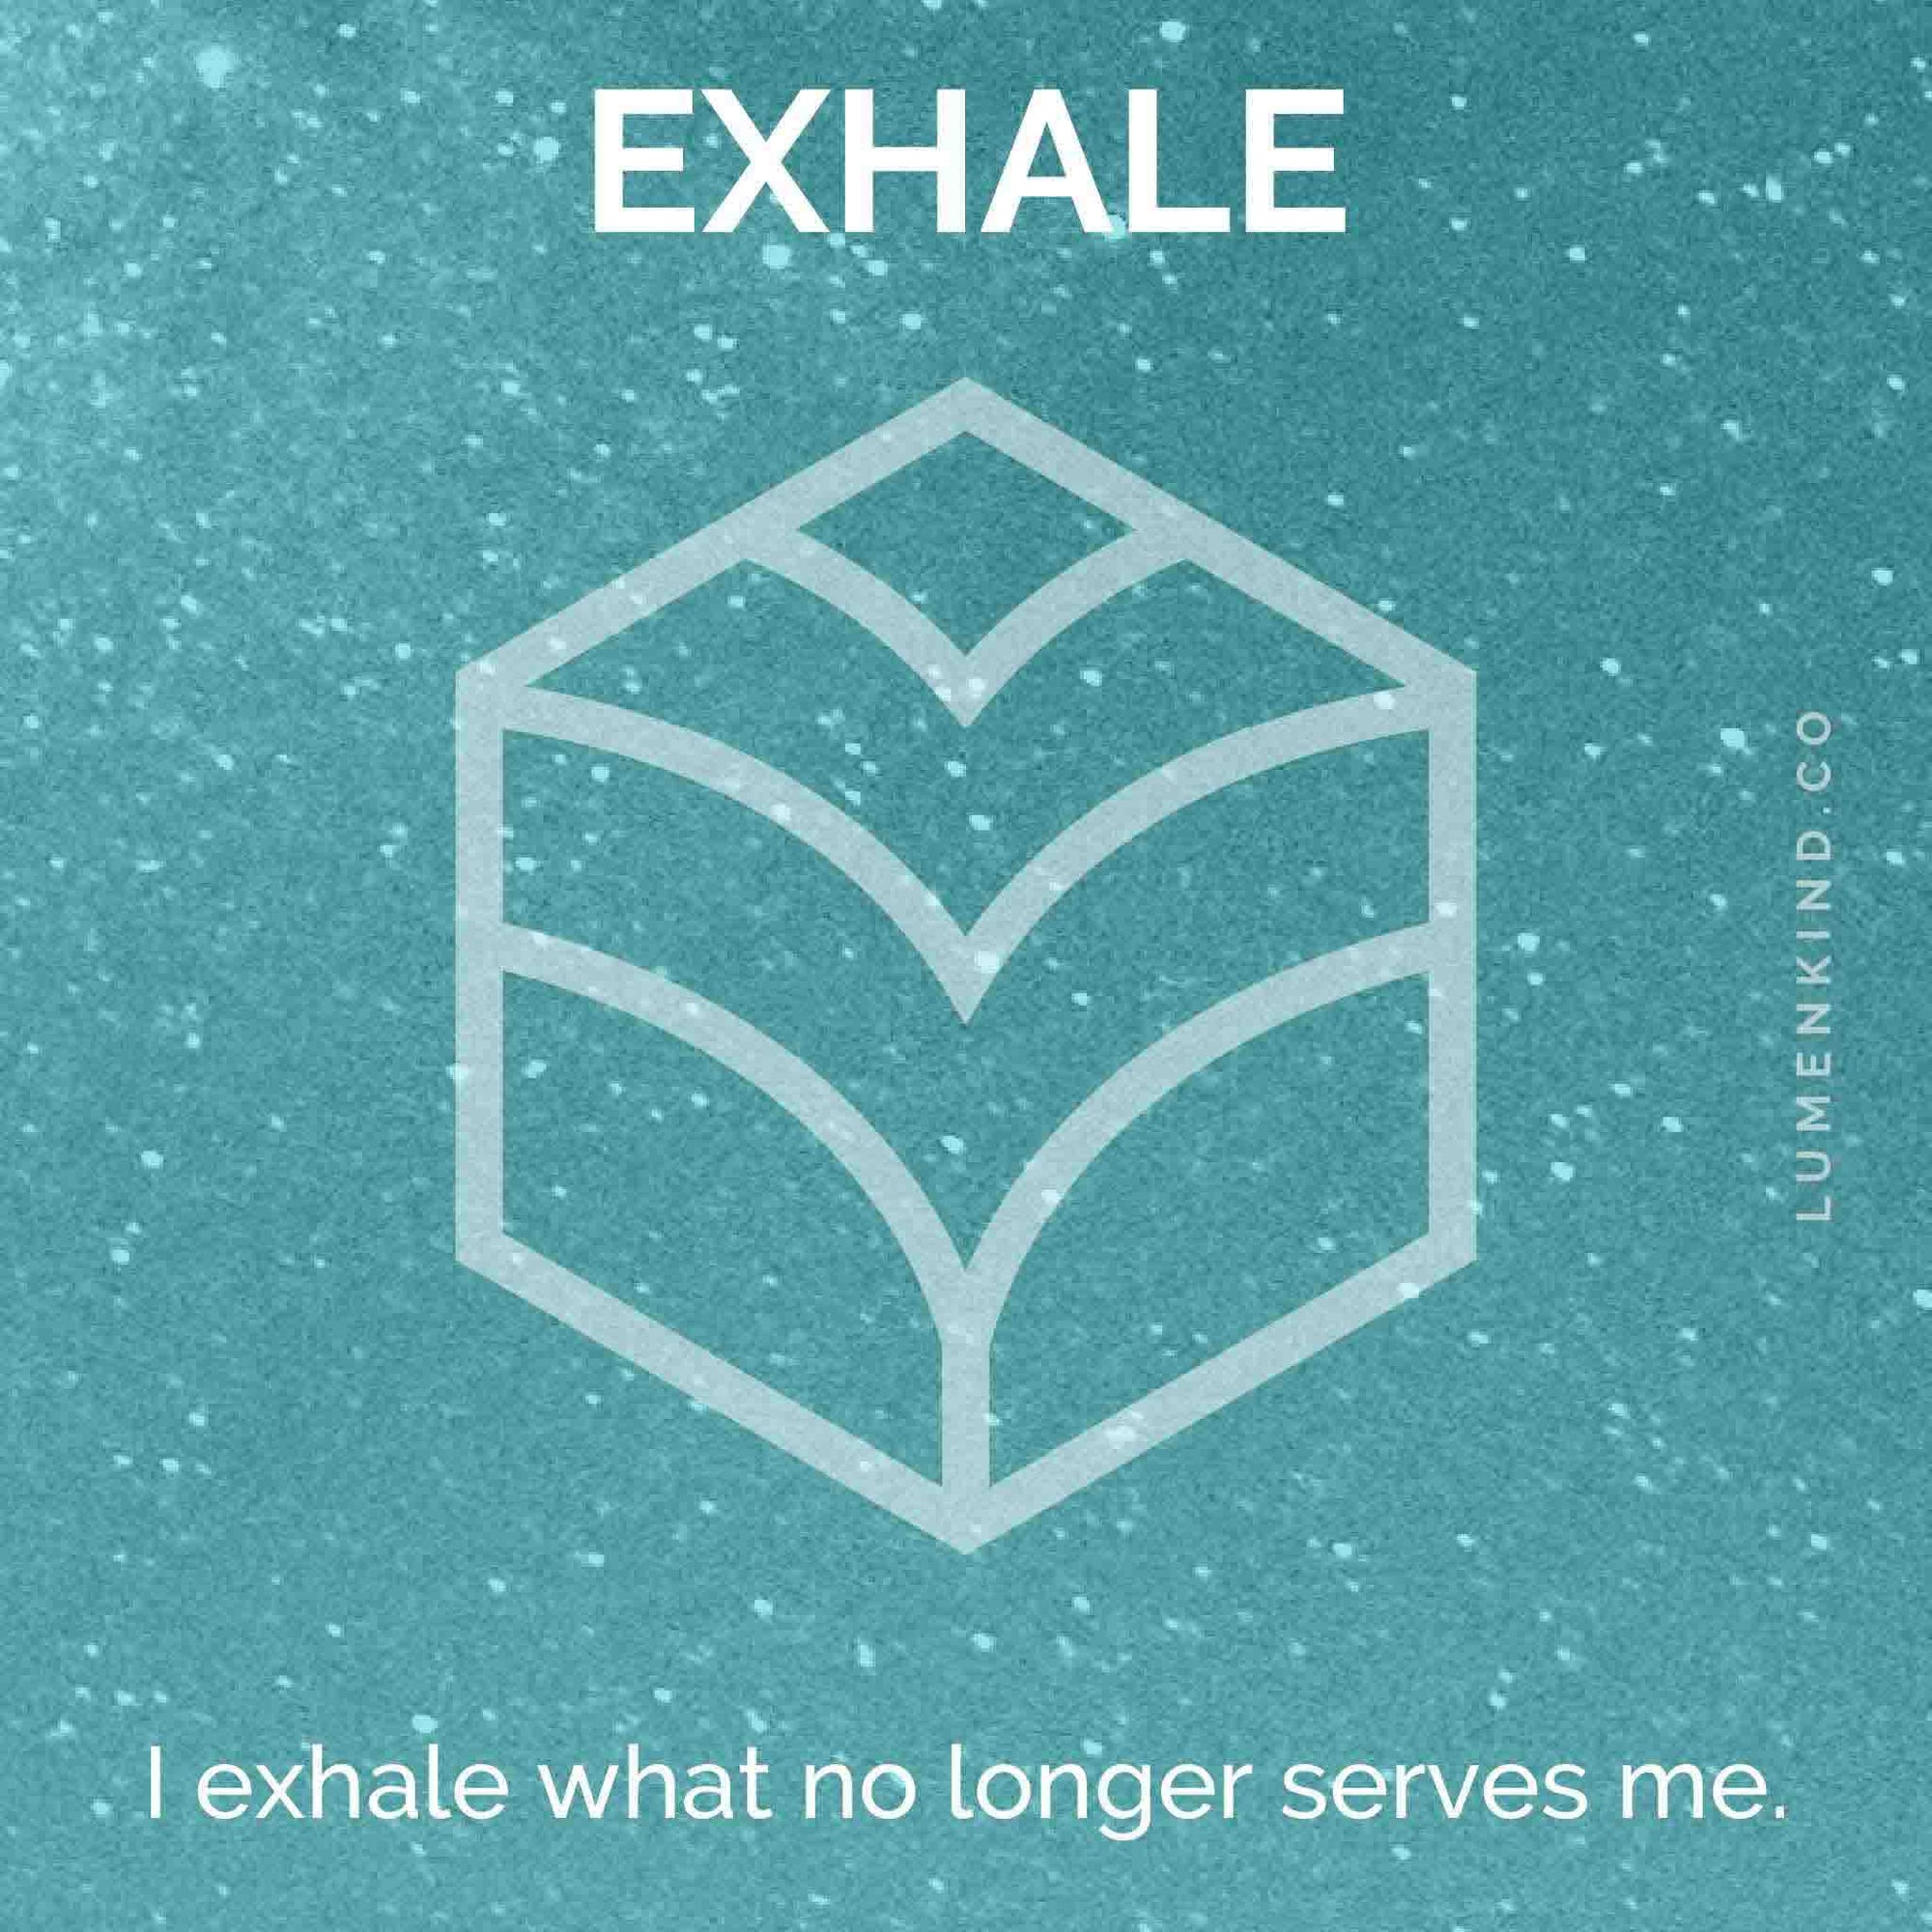 The suggested intention is EXHALE. I exhale what no longer serves me.